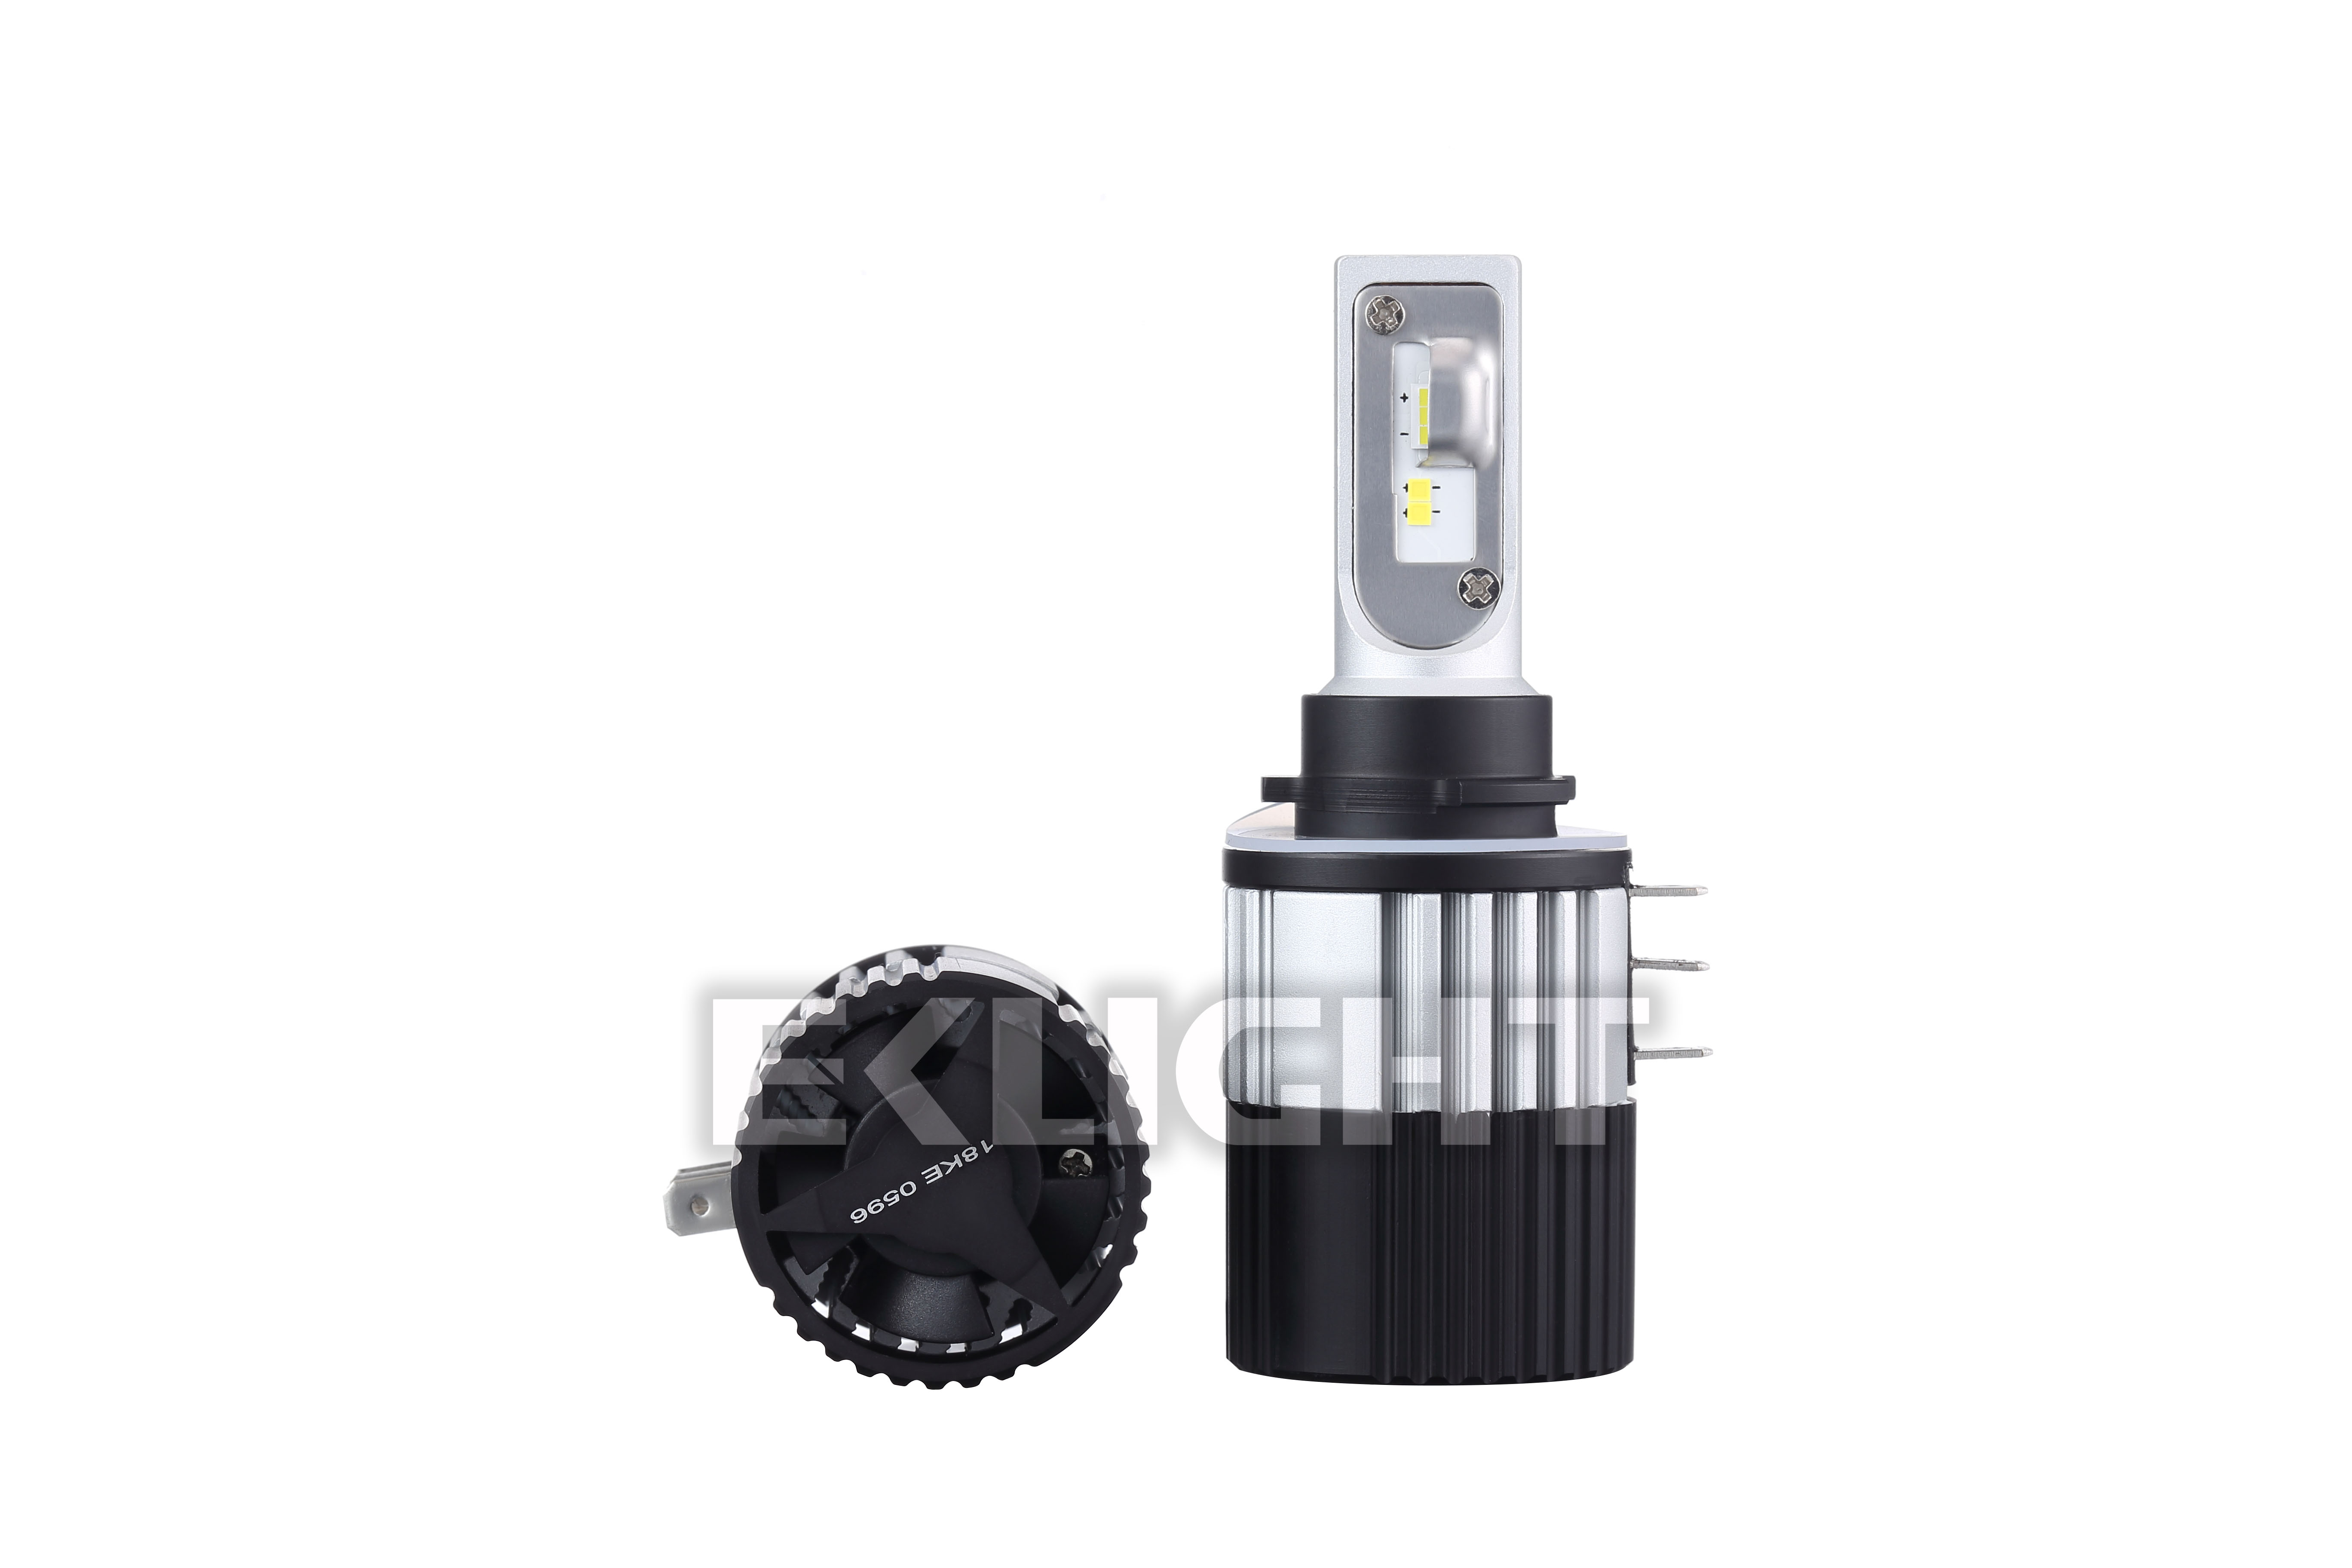 Hot Sale for 12v Voltage Led Car Light -
 30W high power H15 canbus LED headlight bulb to fit on golf series – EKLIGHT